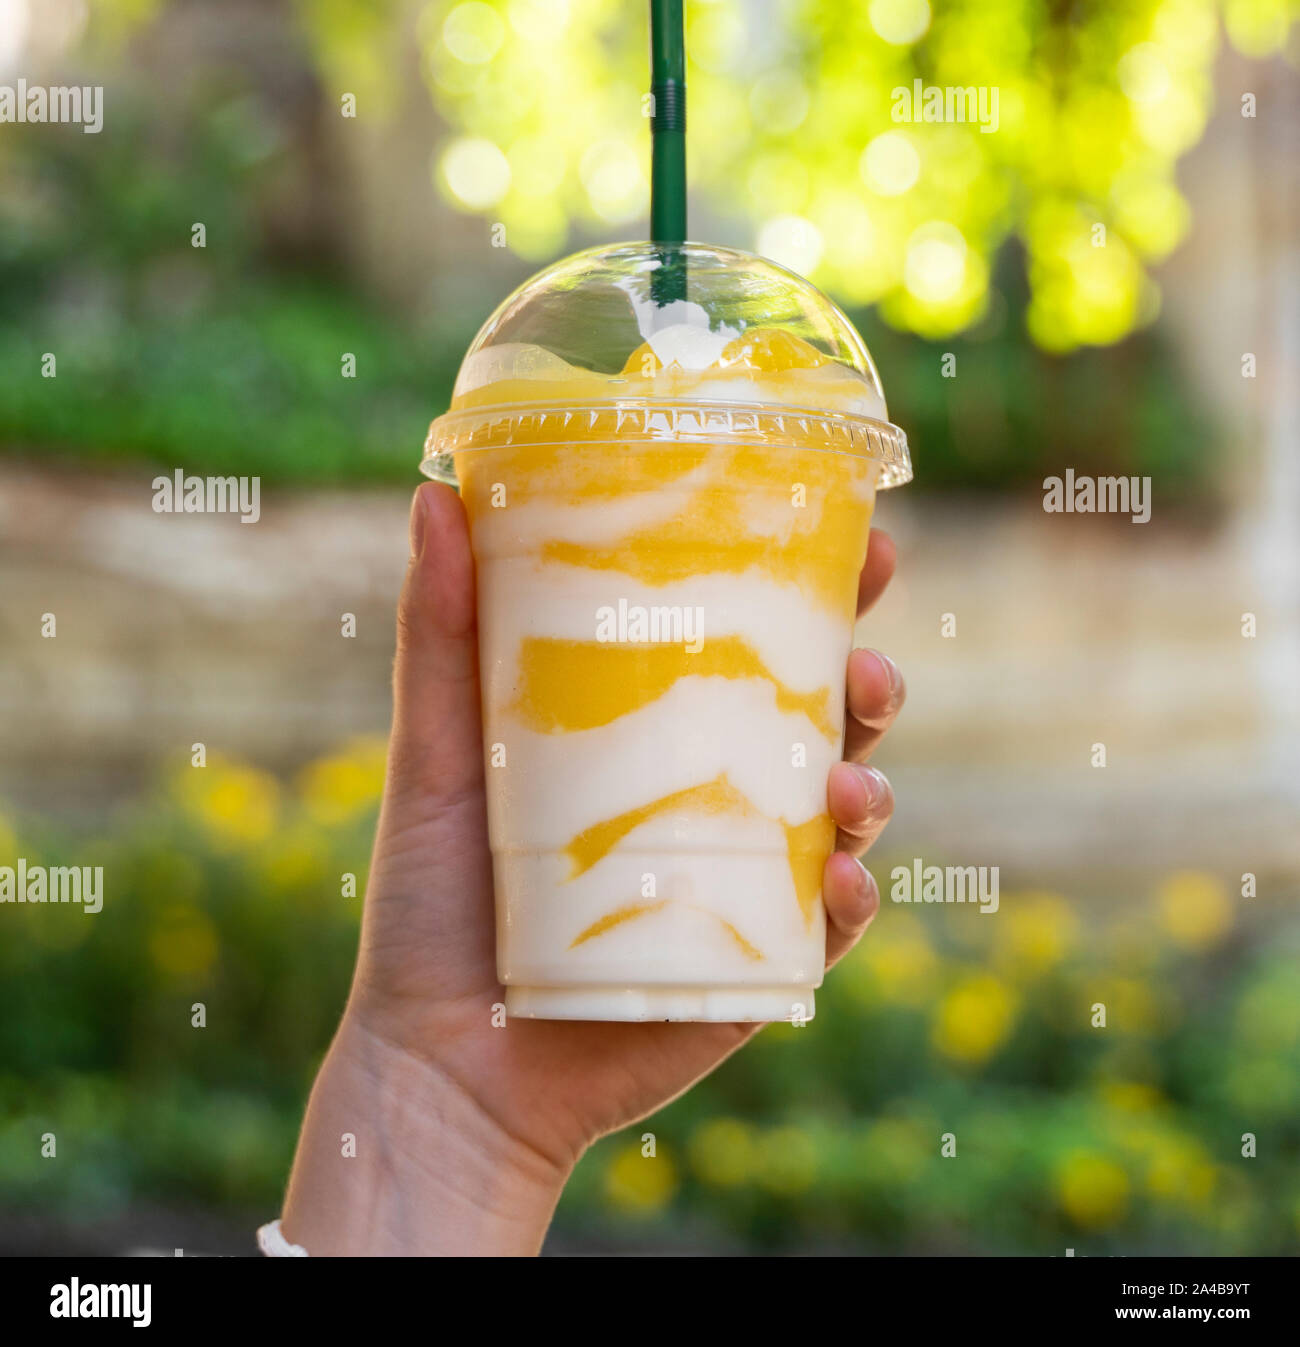 https://c8.alamy.com/comp/2A4B9YT/milkshake-in-a-plastic-glass-with-a-straw-with-a-green-background-2A4B9YT.jpg